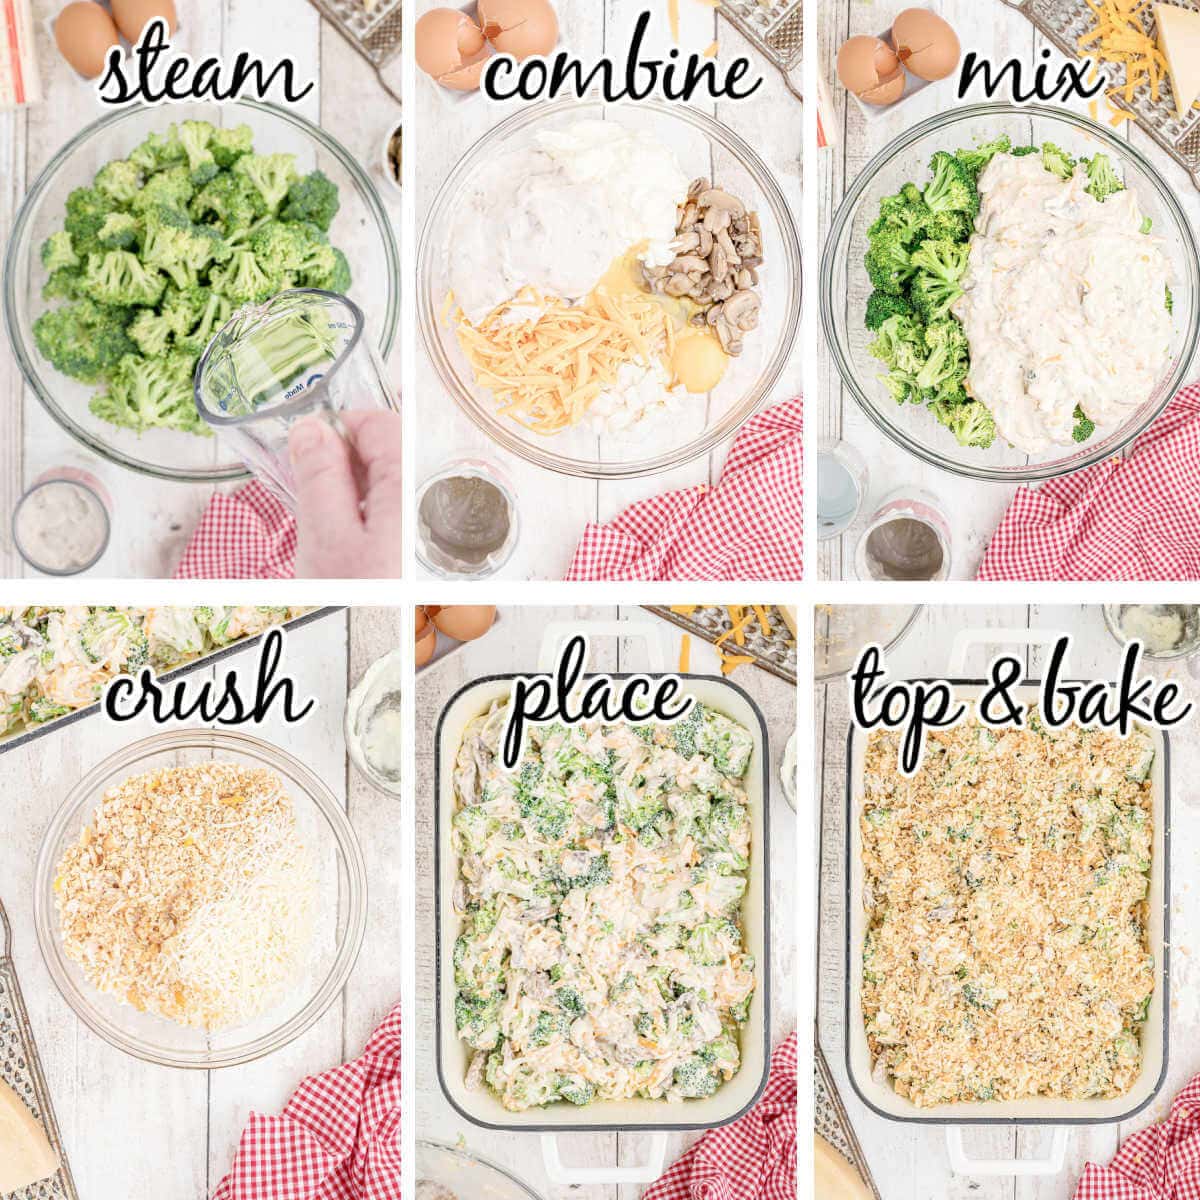 Photos with step by step instruction to make vegetable casserole dish, with print overlay.